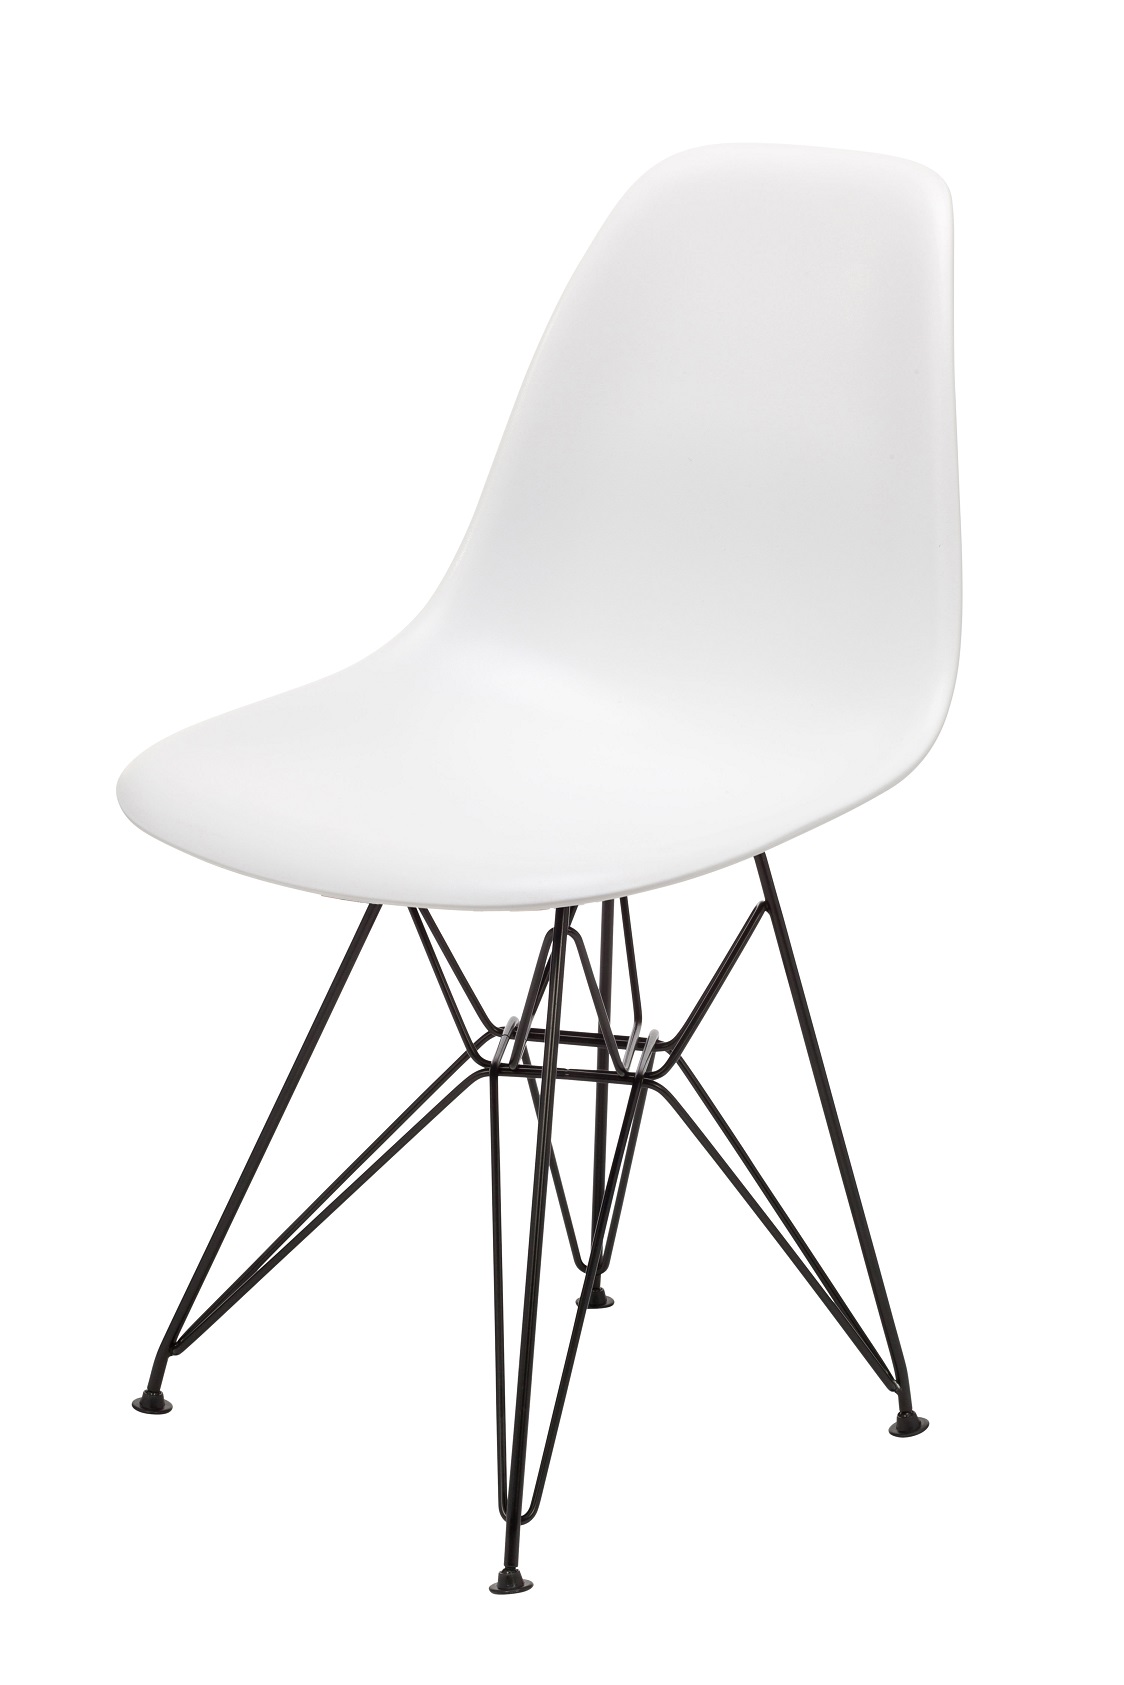 Replica Charles Eames Chairs